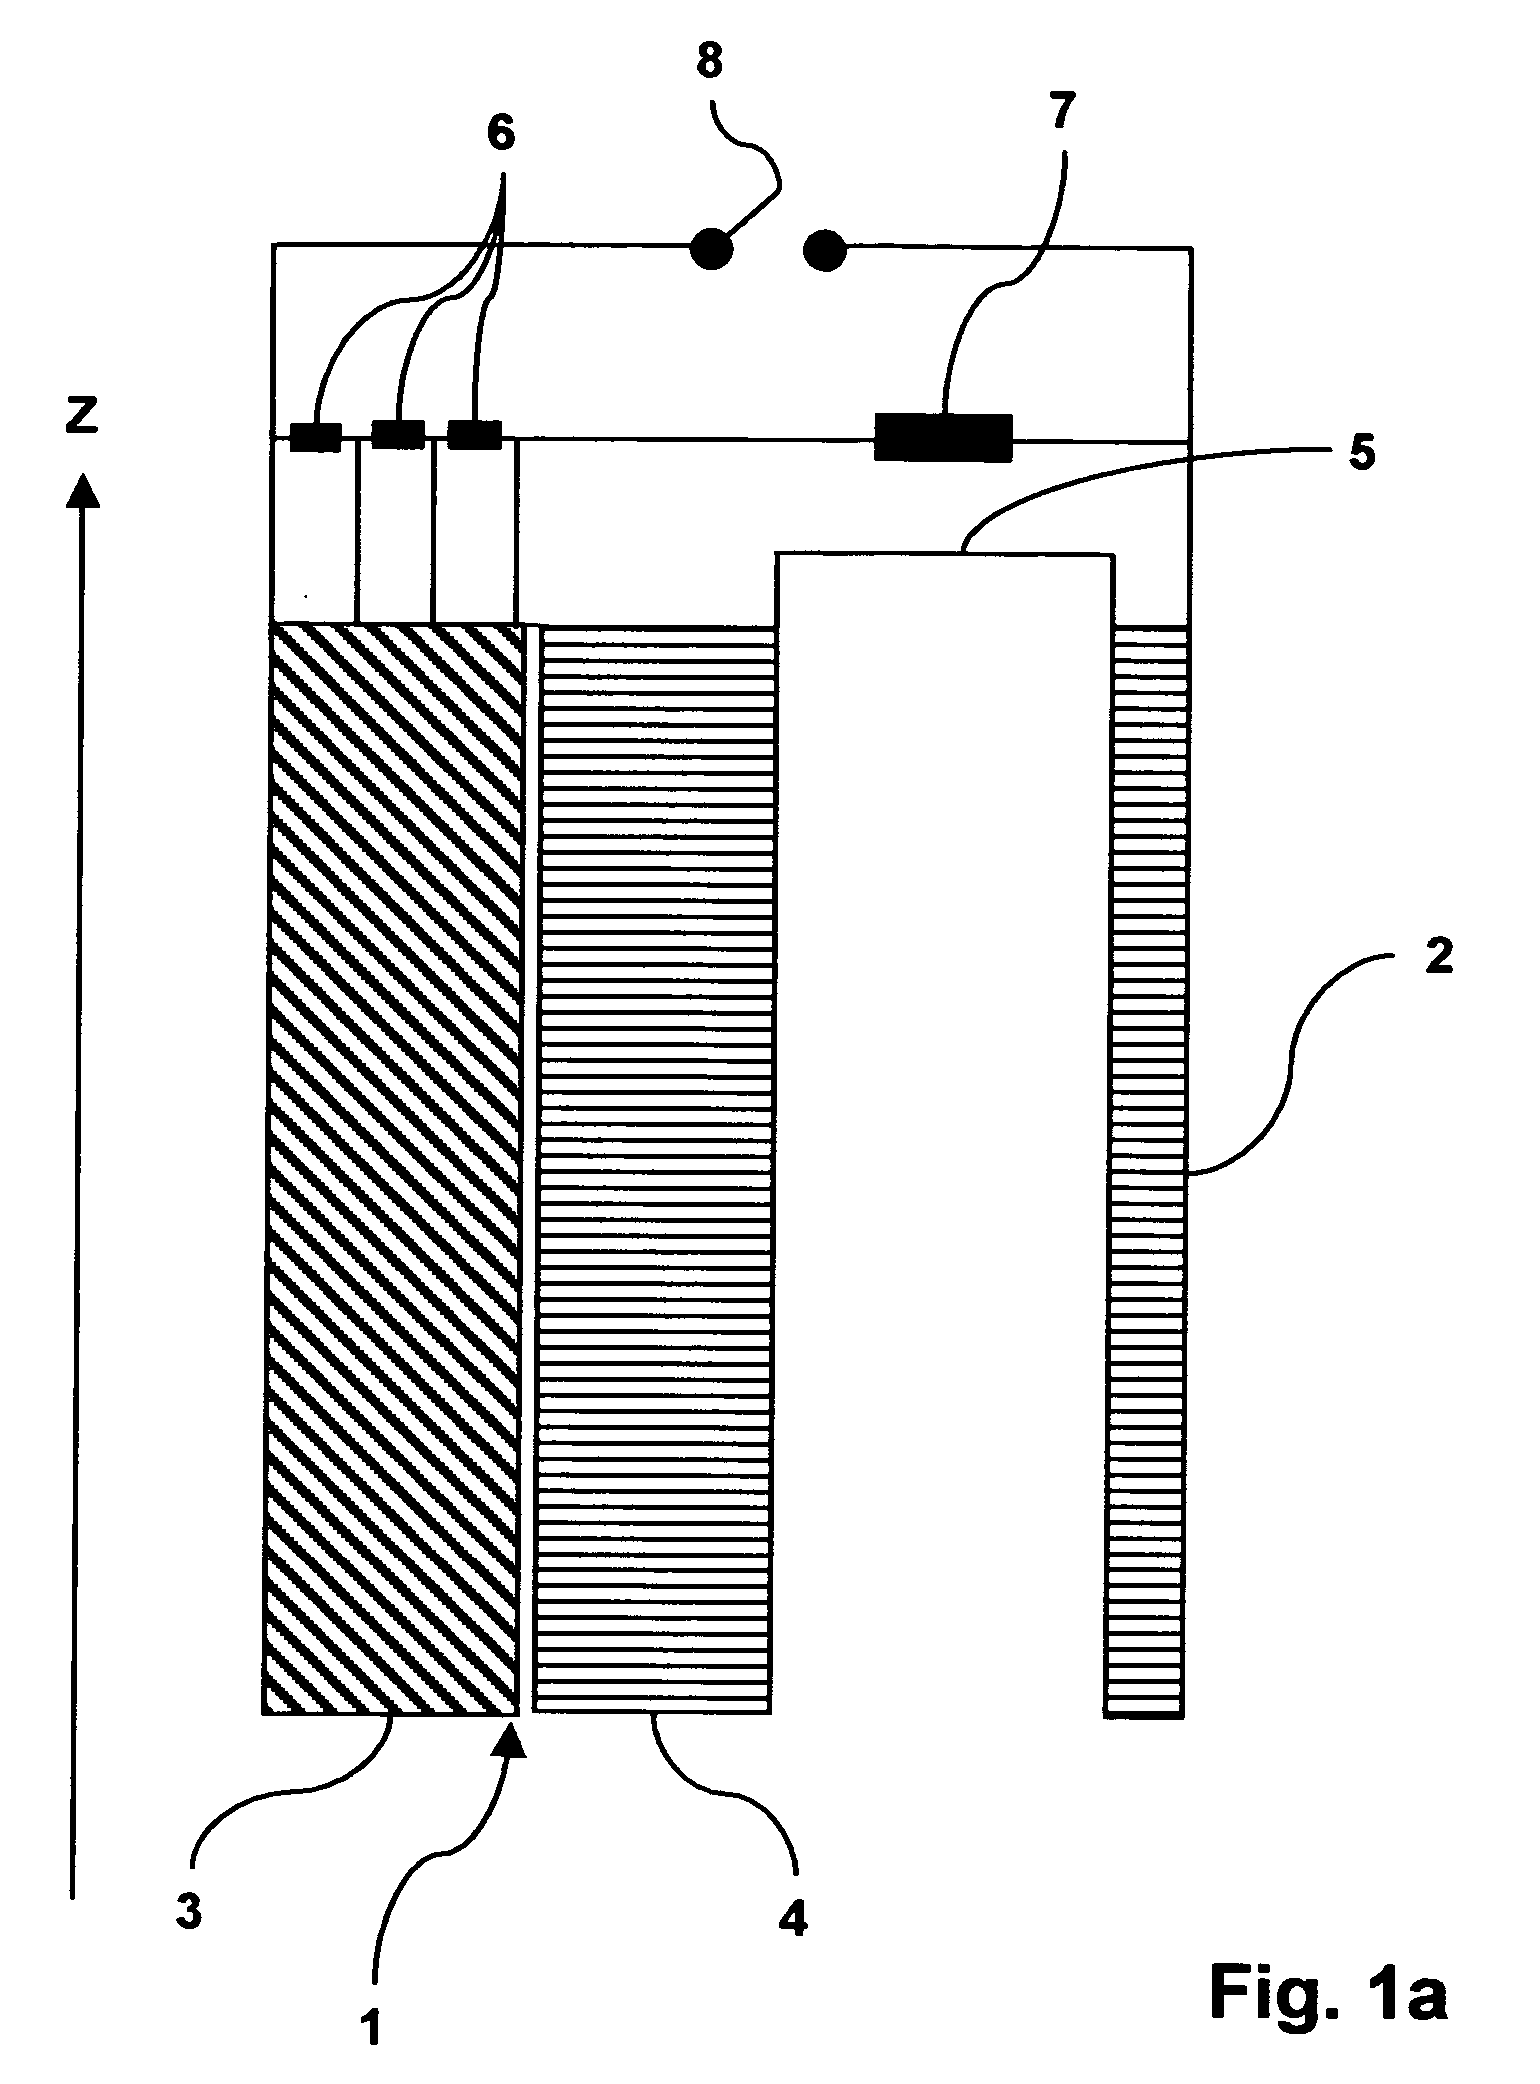 Superconducting magnet coil system with quench protection